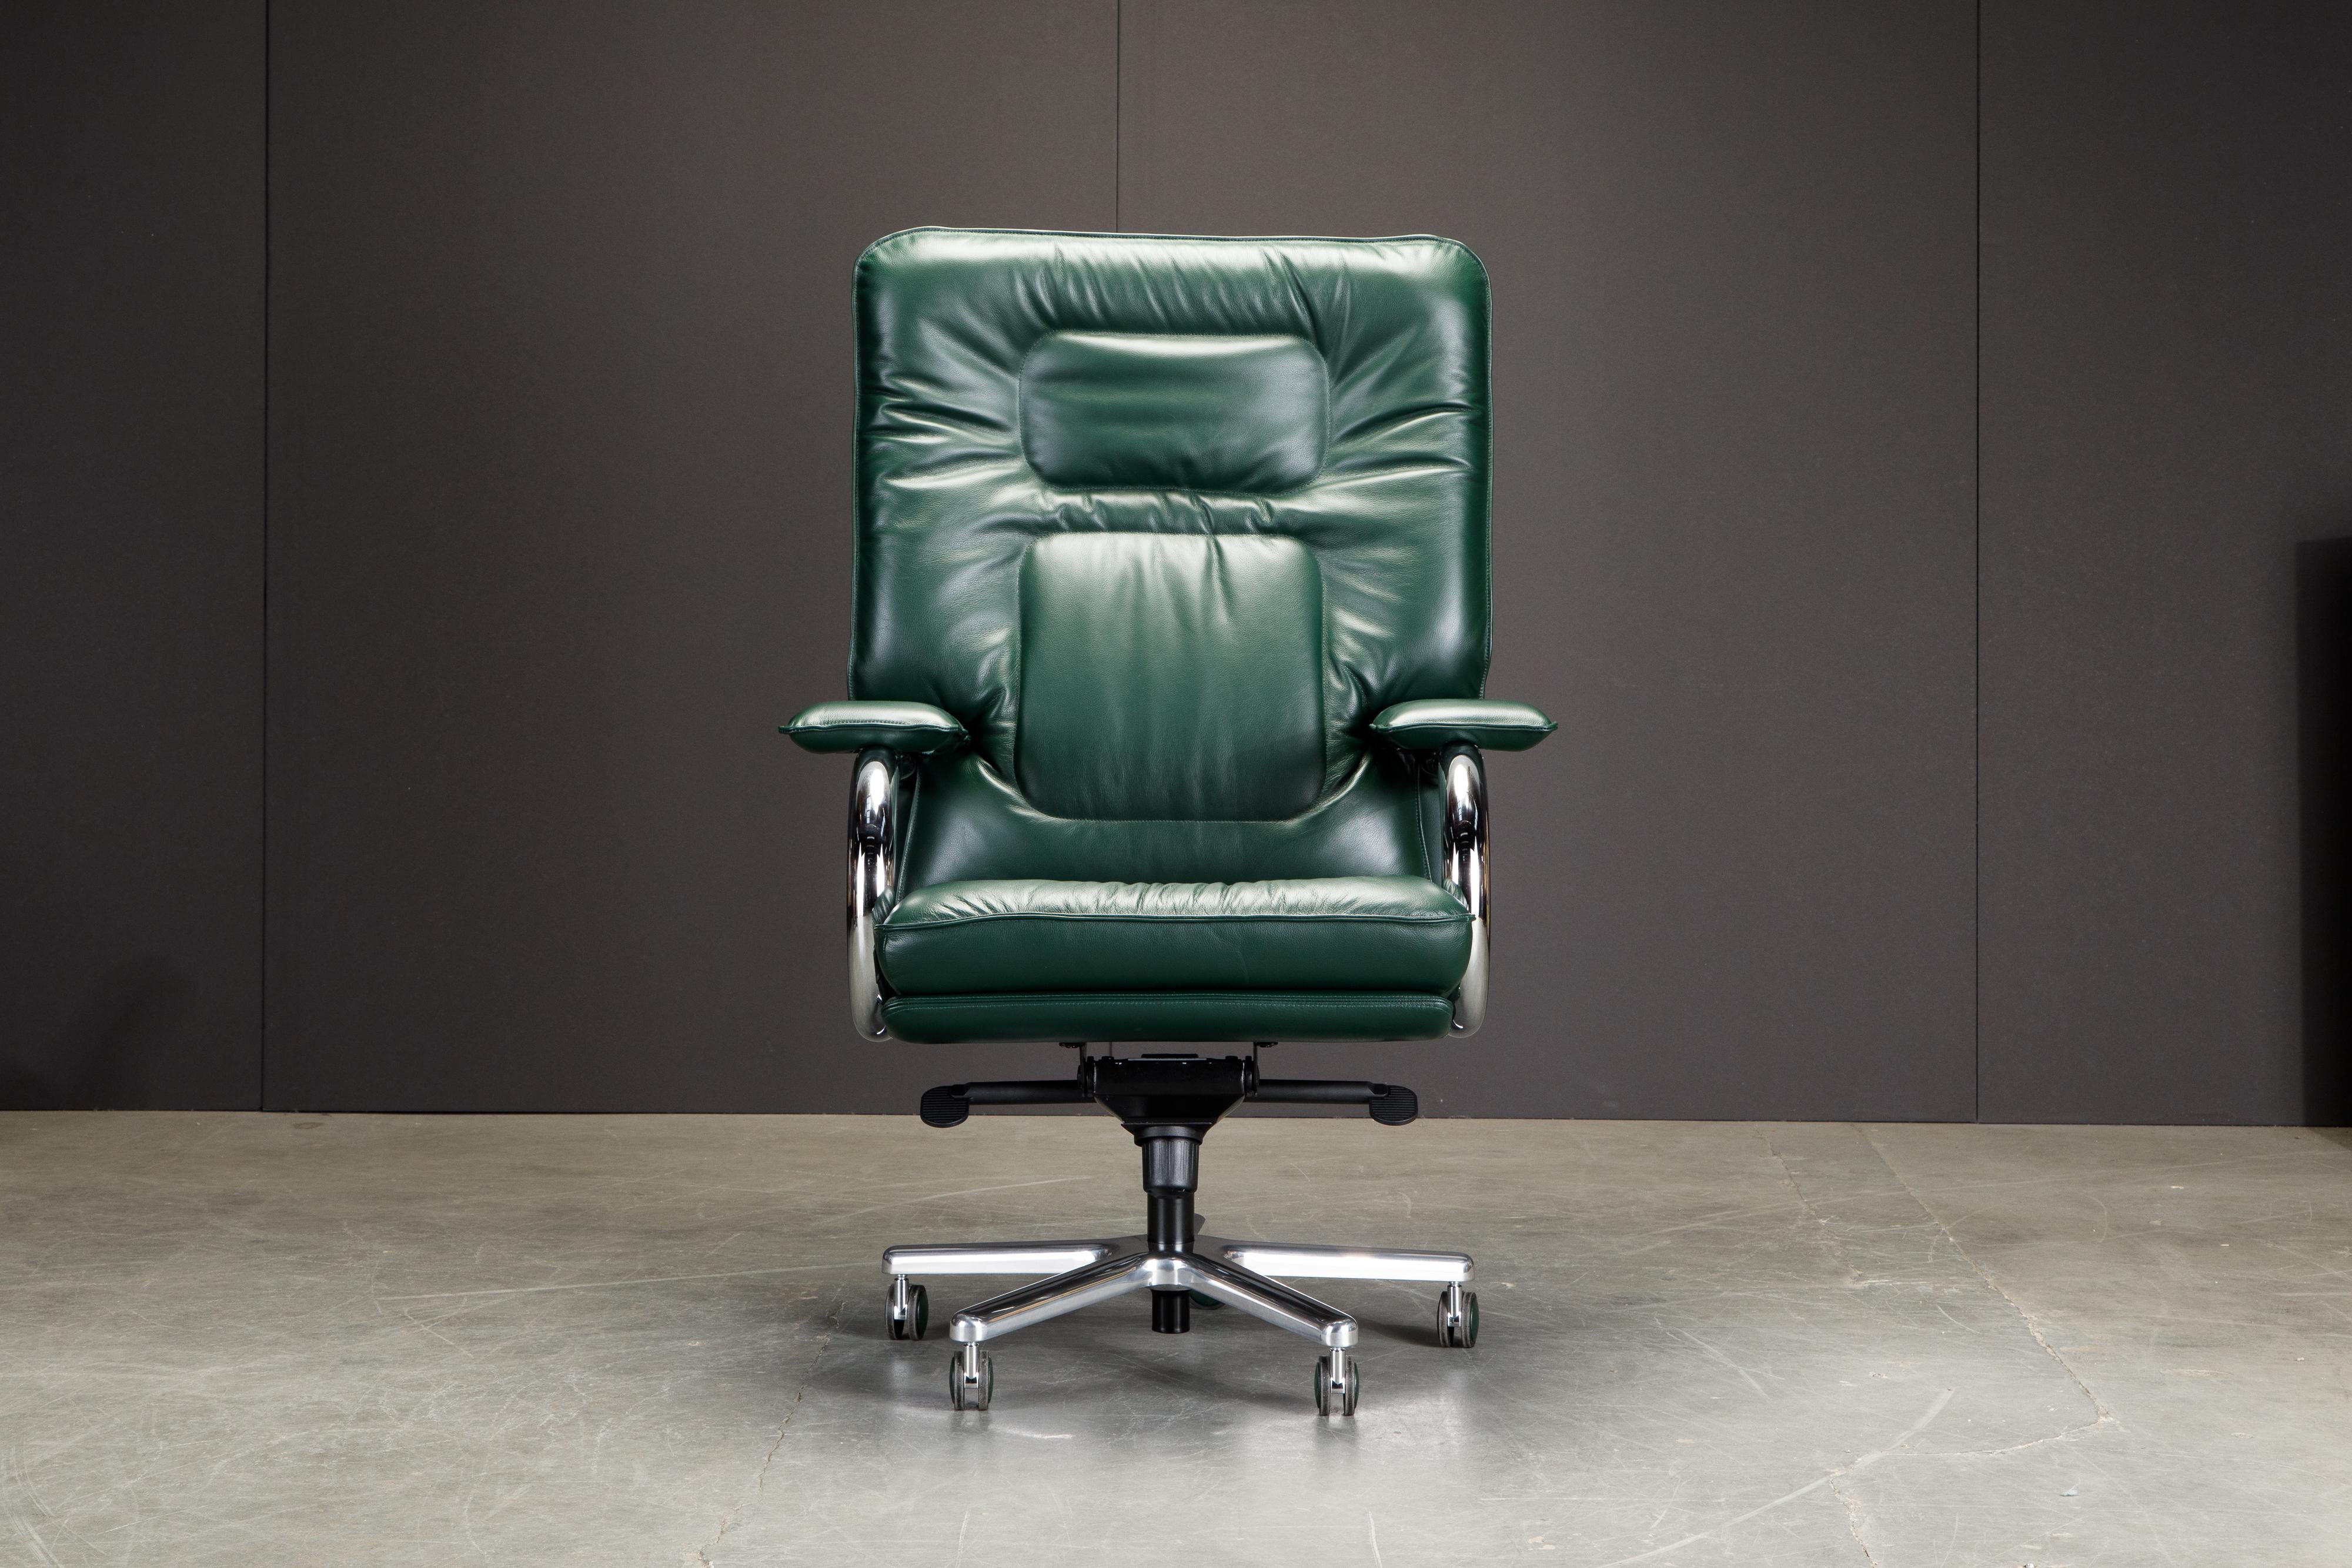 This incredible executives chair is named 'Big', designed by Guido Faleschini by i4 Mariani originally designed in the 1970s, this example newly produced in a gorgeous emerald green leather. 

Such incredible style, no wonder these were featured